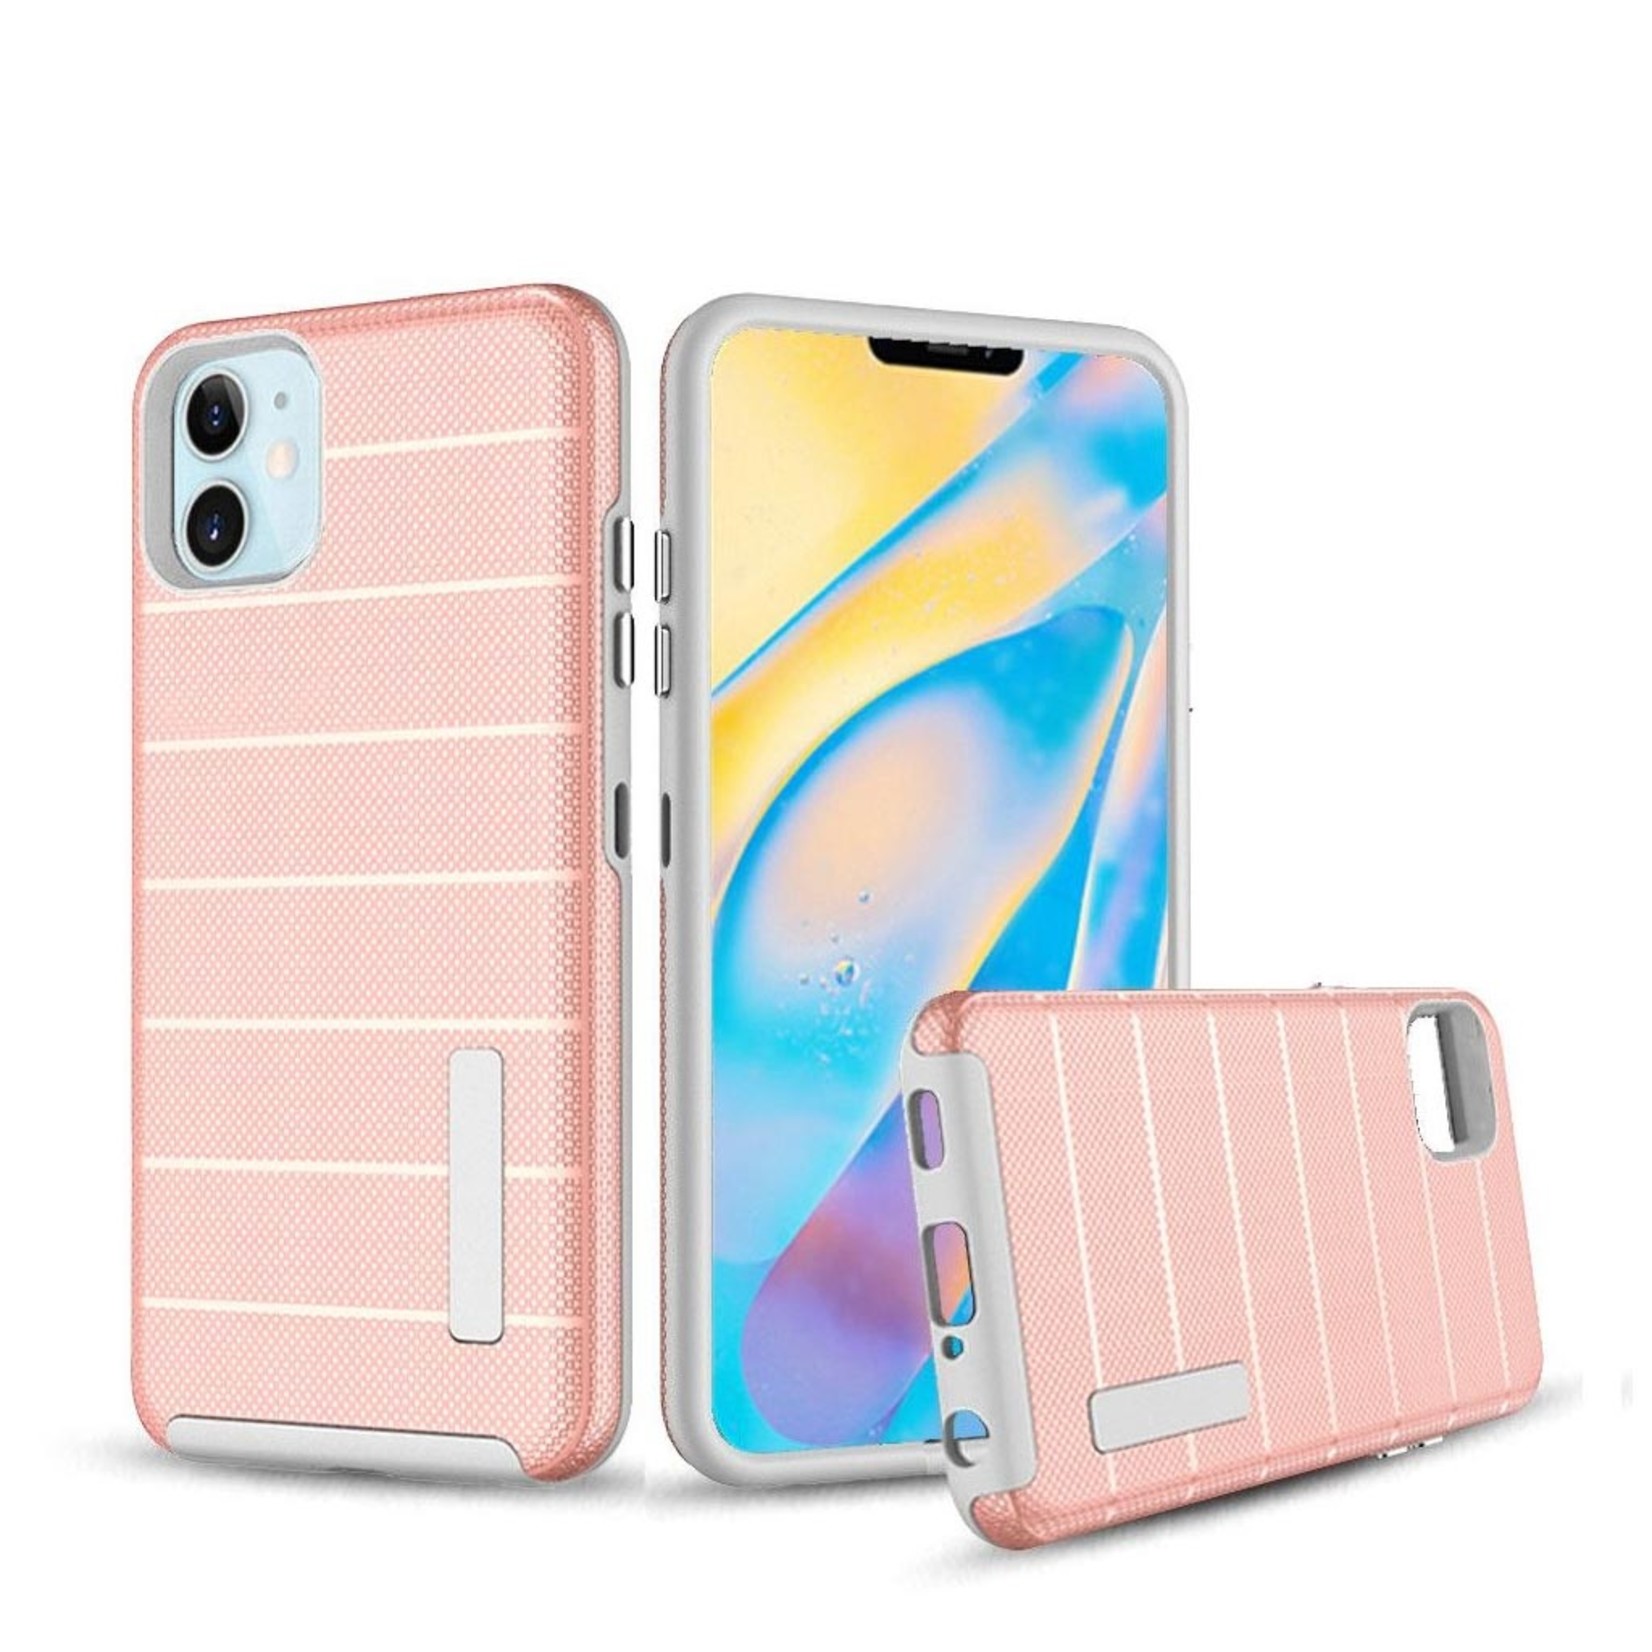 PC TPU Shock Proof Hybrid case with Stripes Design for iPhone 12 Mini